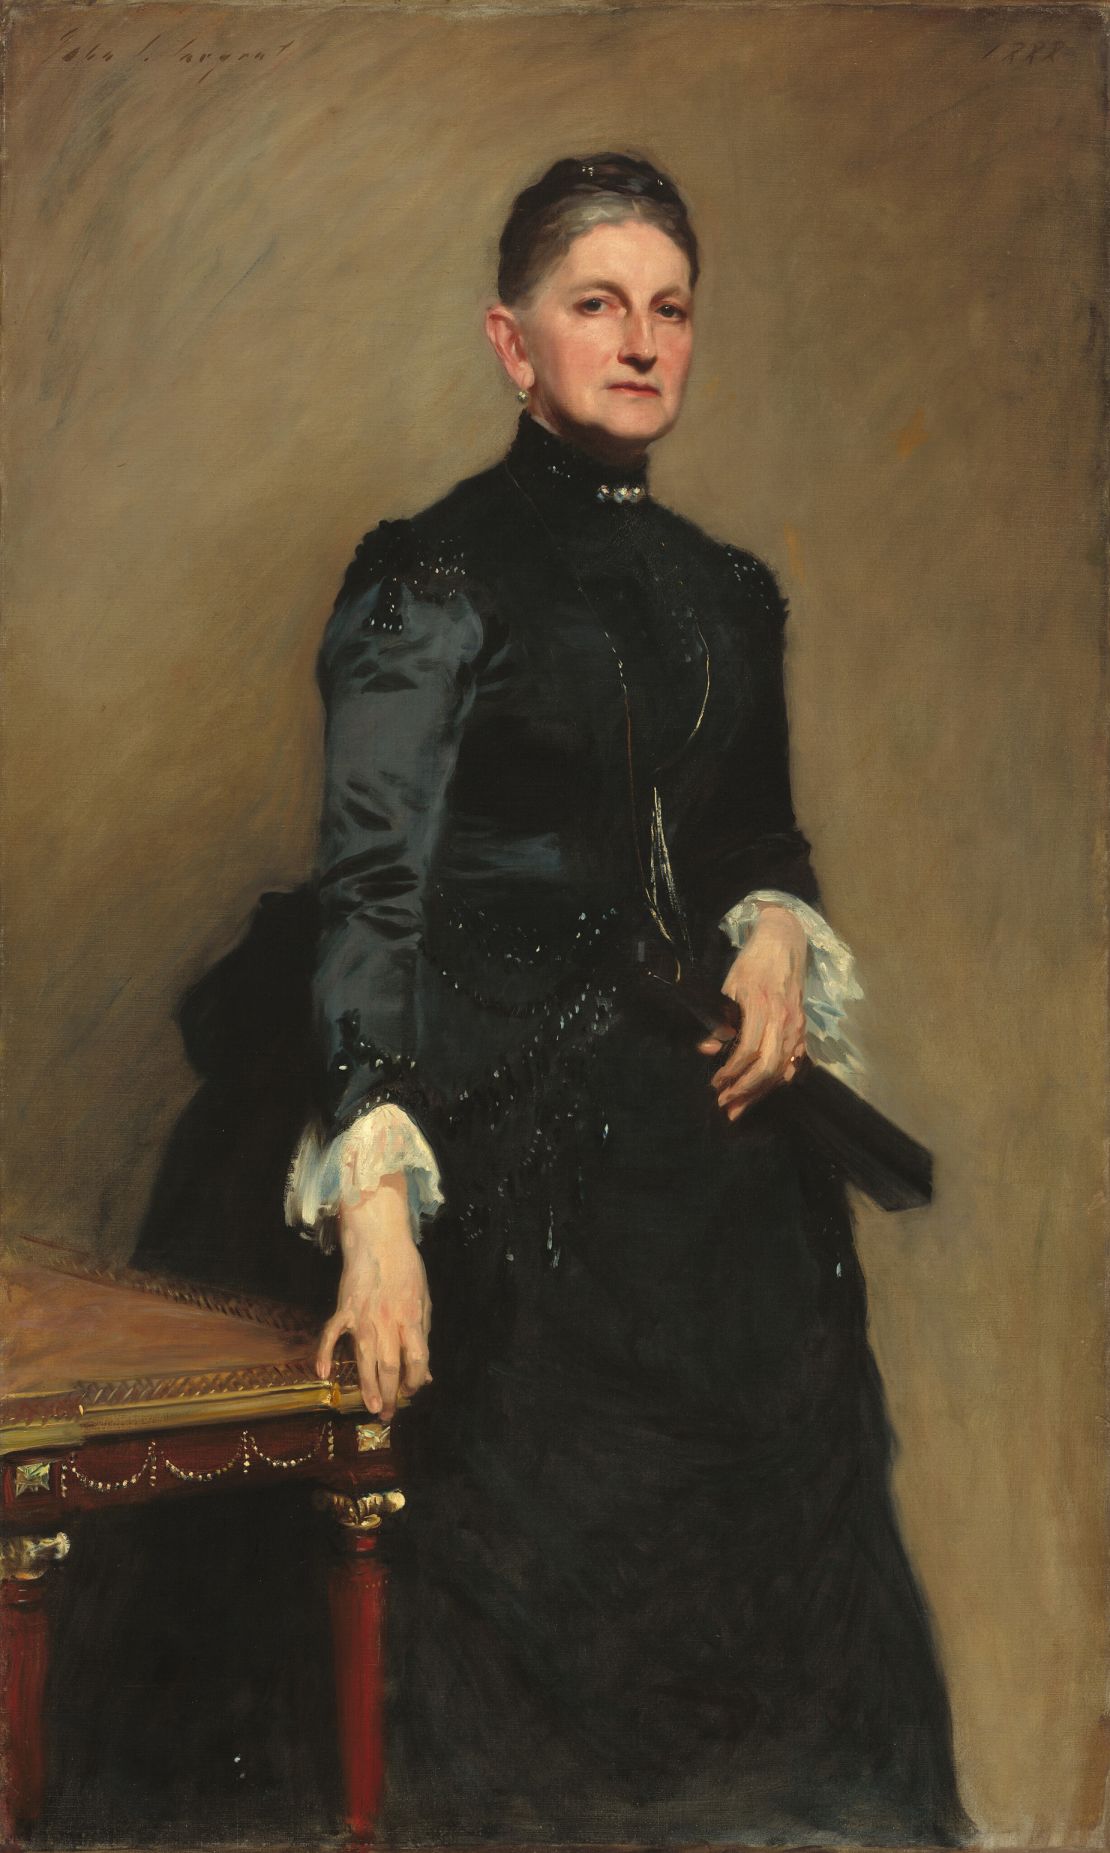 Despite curating a selection of her best frocks, Eleanor Iselin was captured in her casual day dress at the insistence of Sargent.